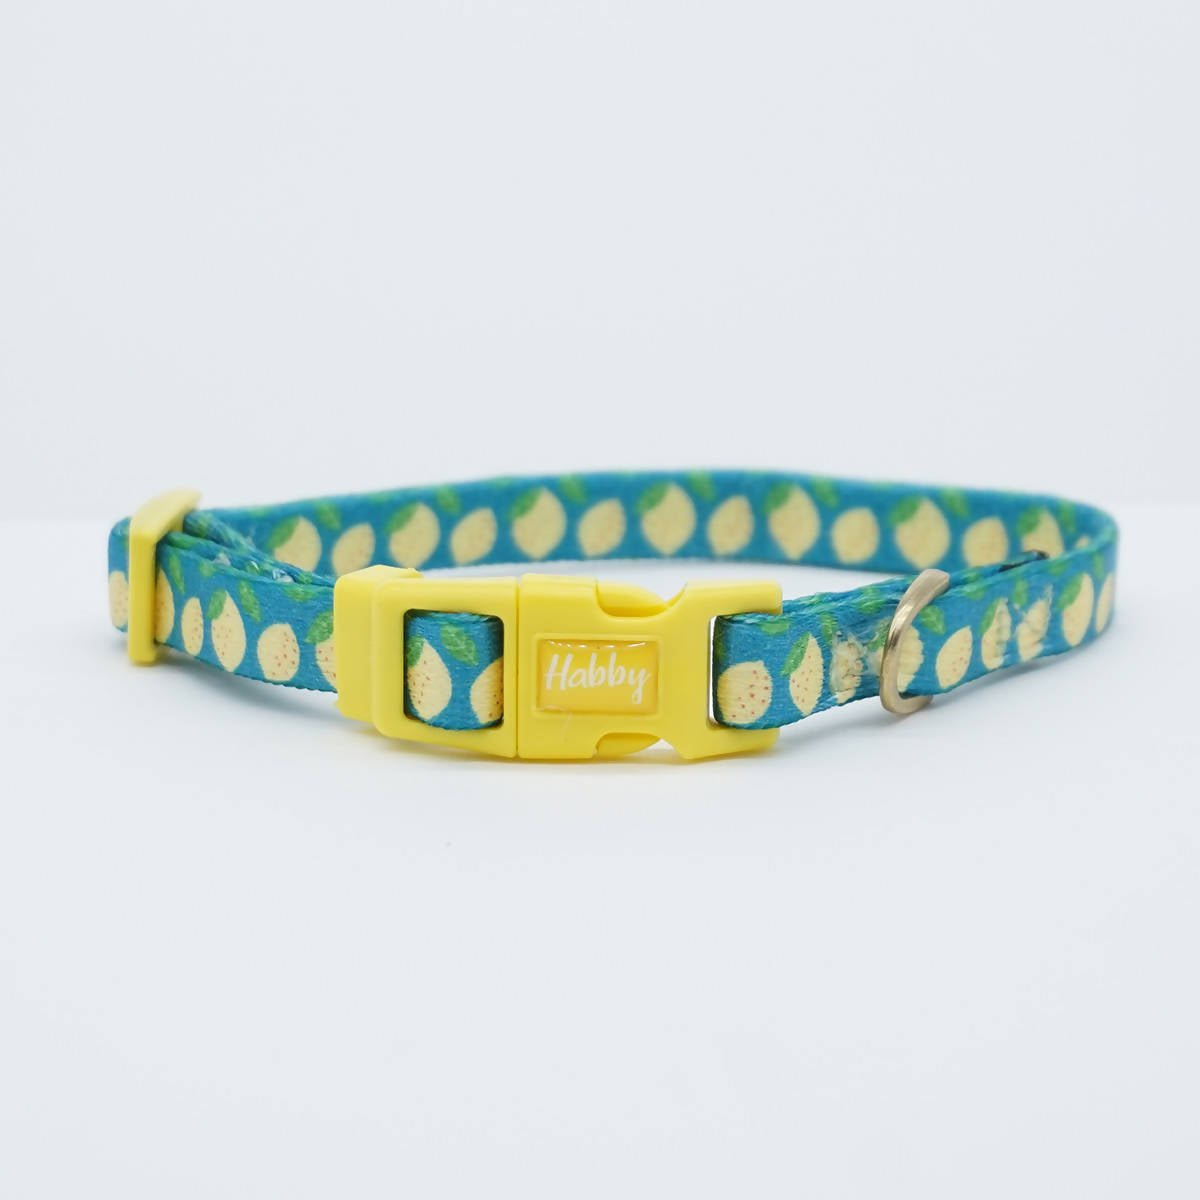 Vibrant collection of dog collars available in our online pet shop. Premium designer dog collar, now in stock at our online store. Puppy Collar. Leather collar.